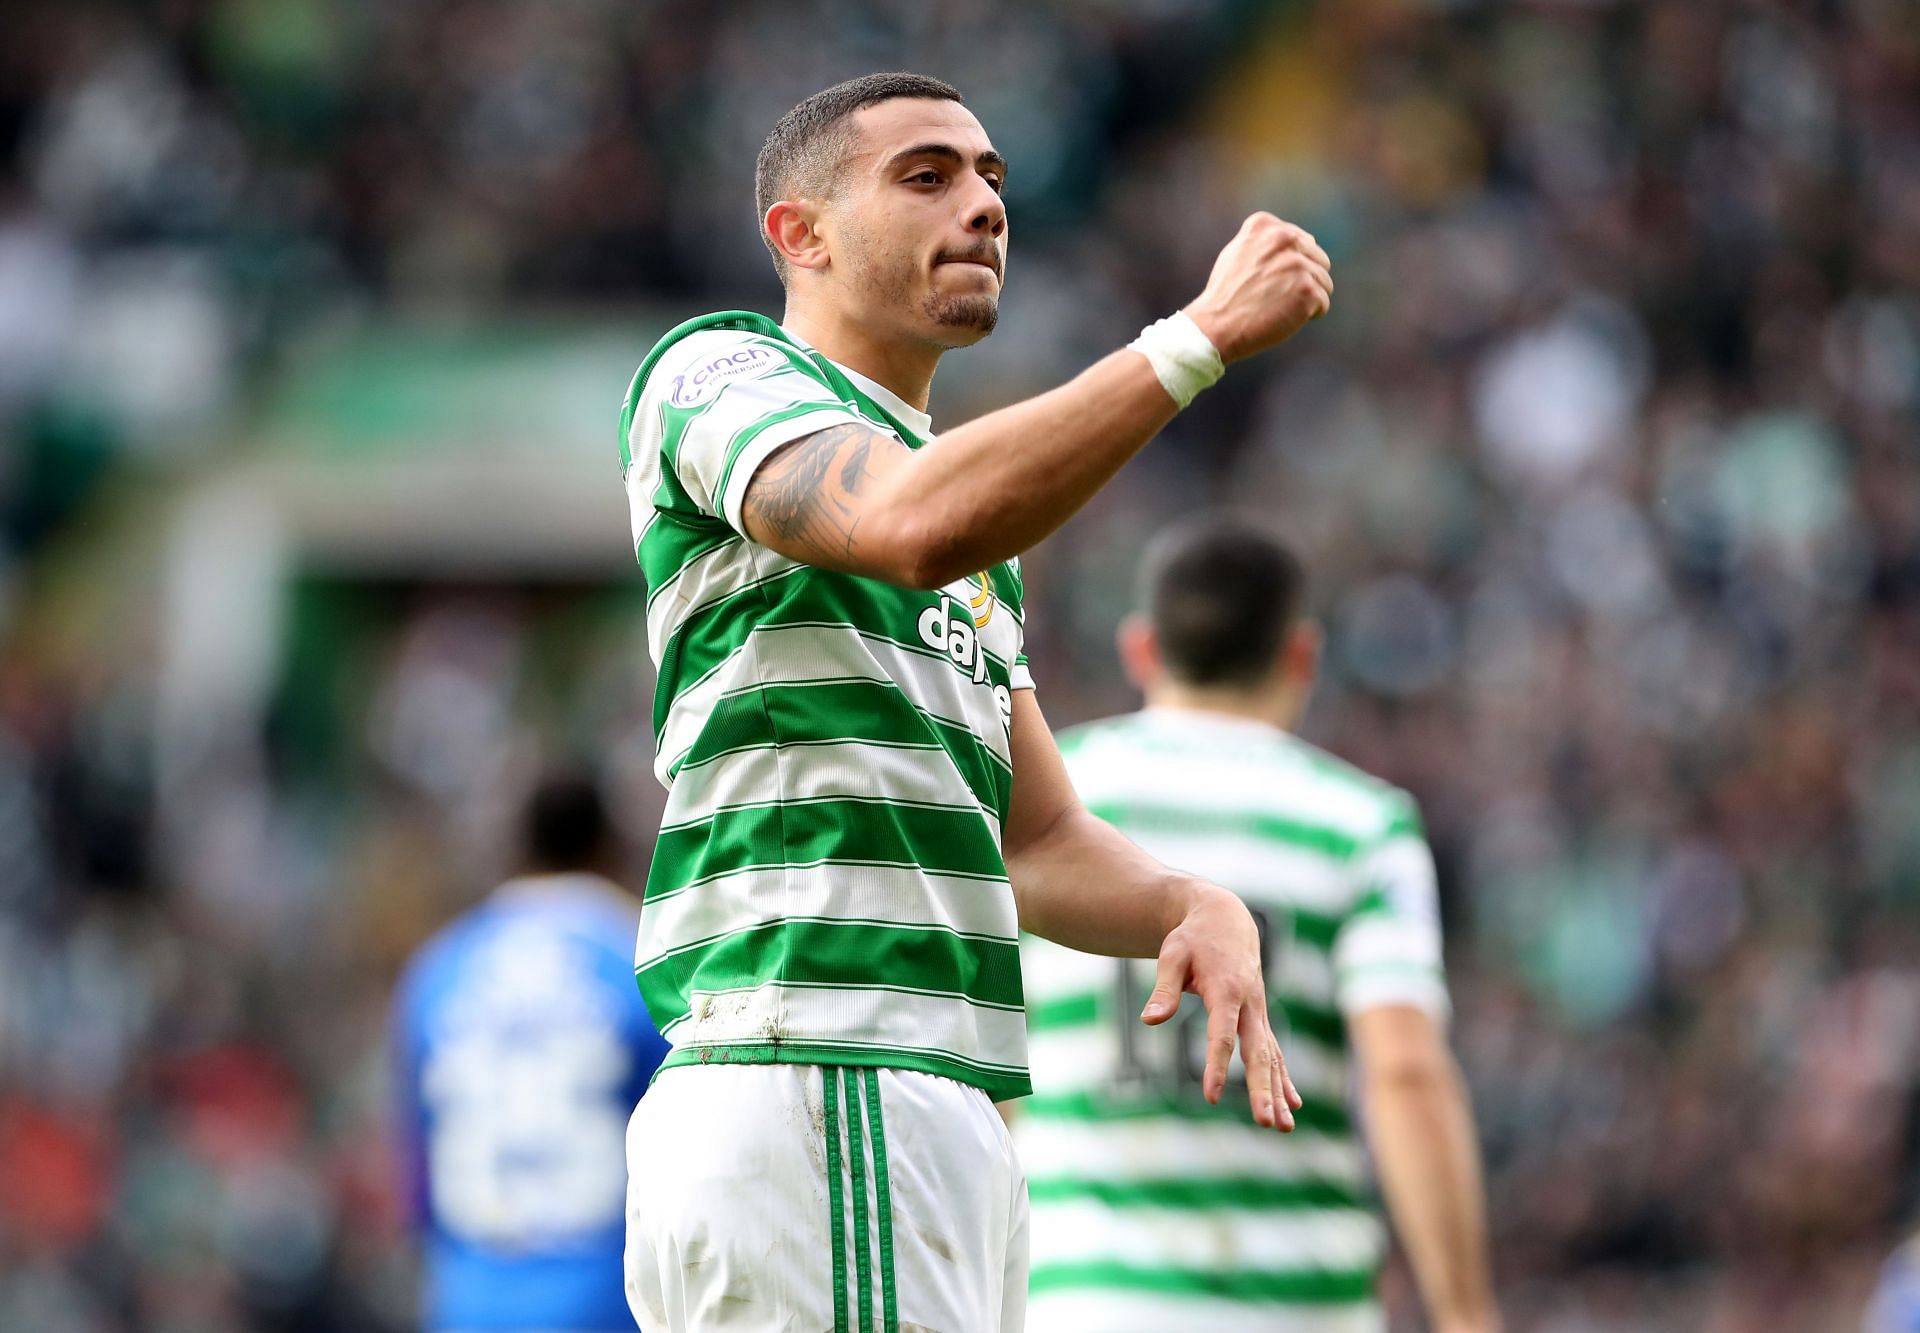 Celtic FC face Livingston in their upcoming Scottish Premier League fixture on Saturday